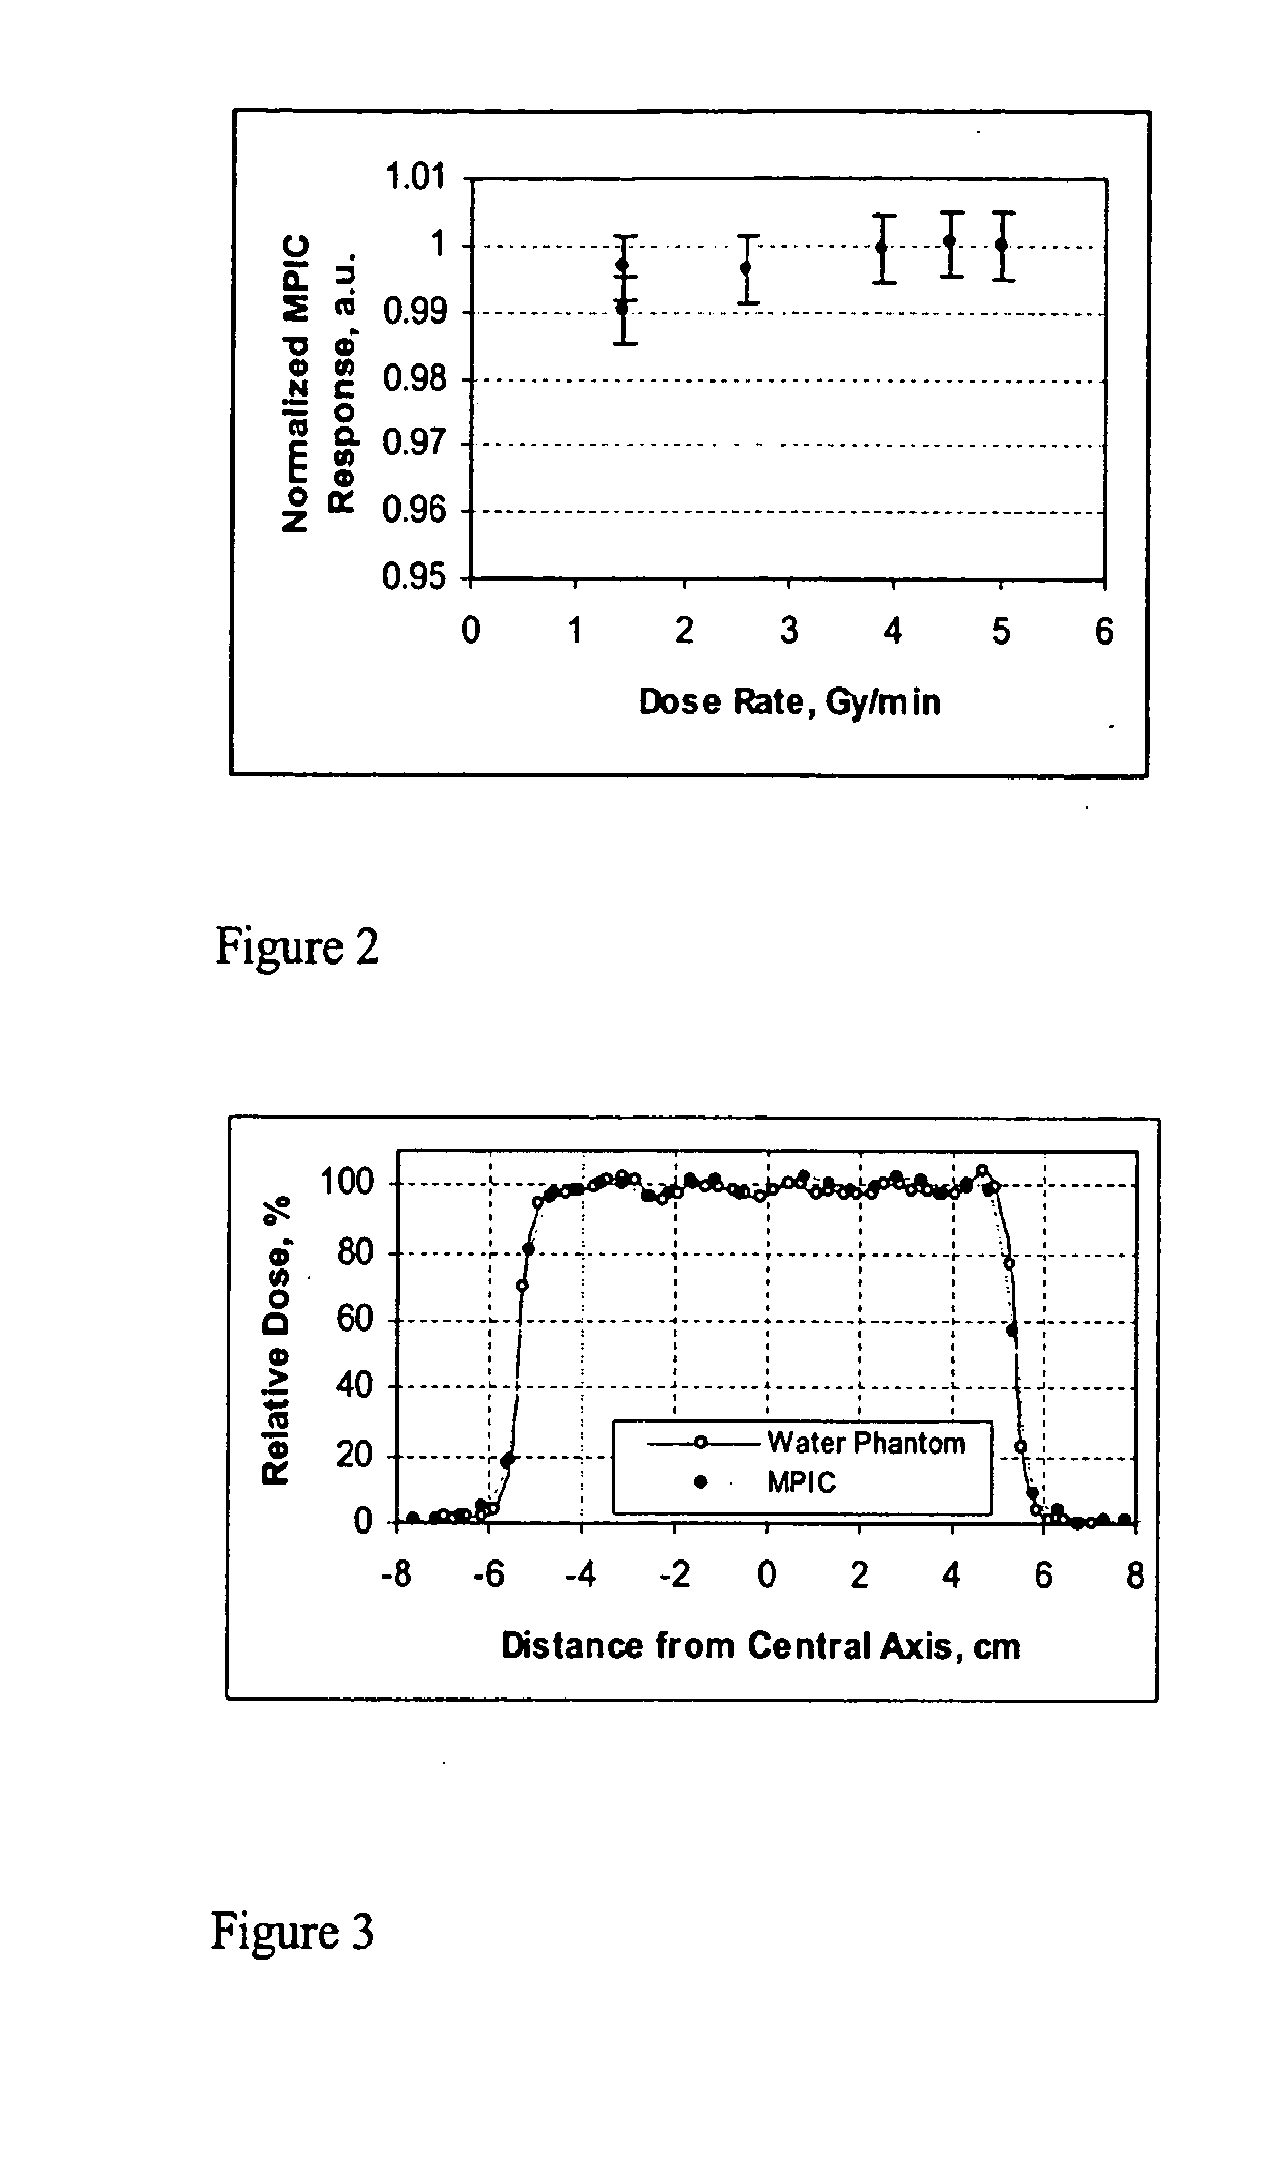 Dose profile measurement system for clinical proton fields